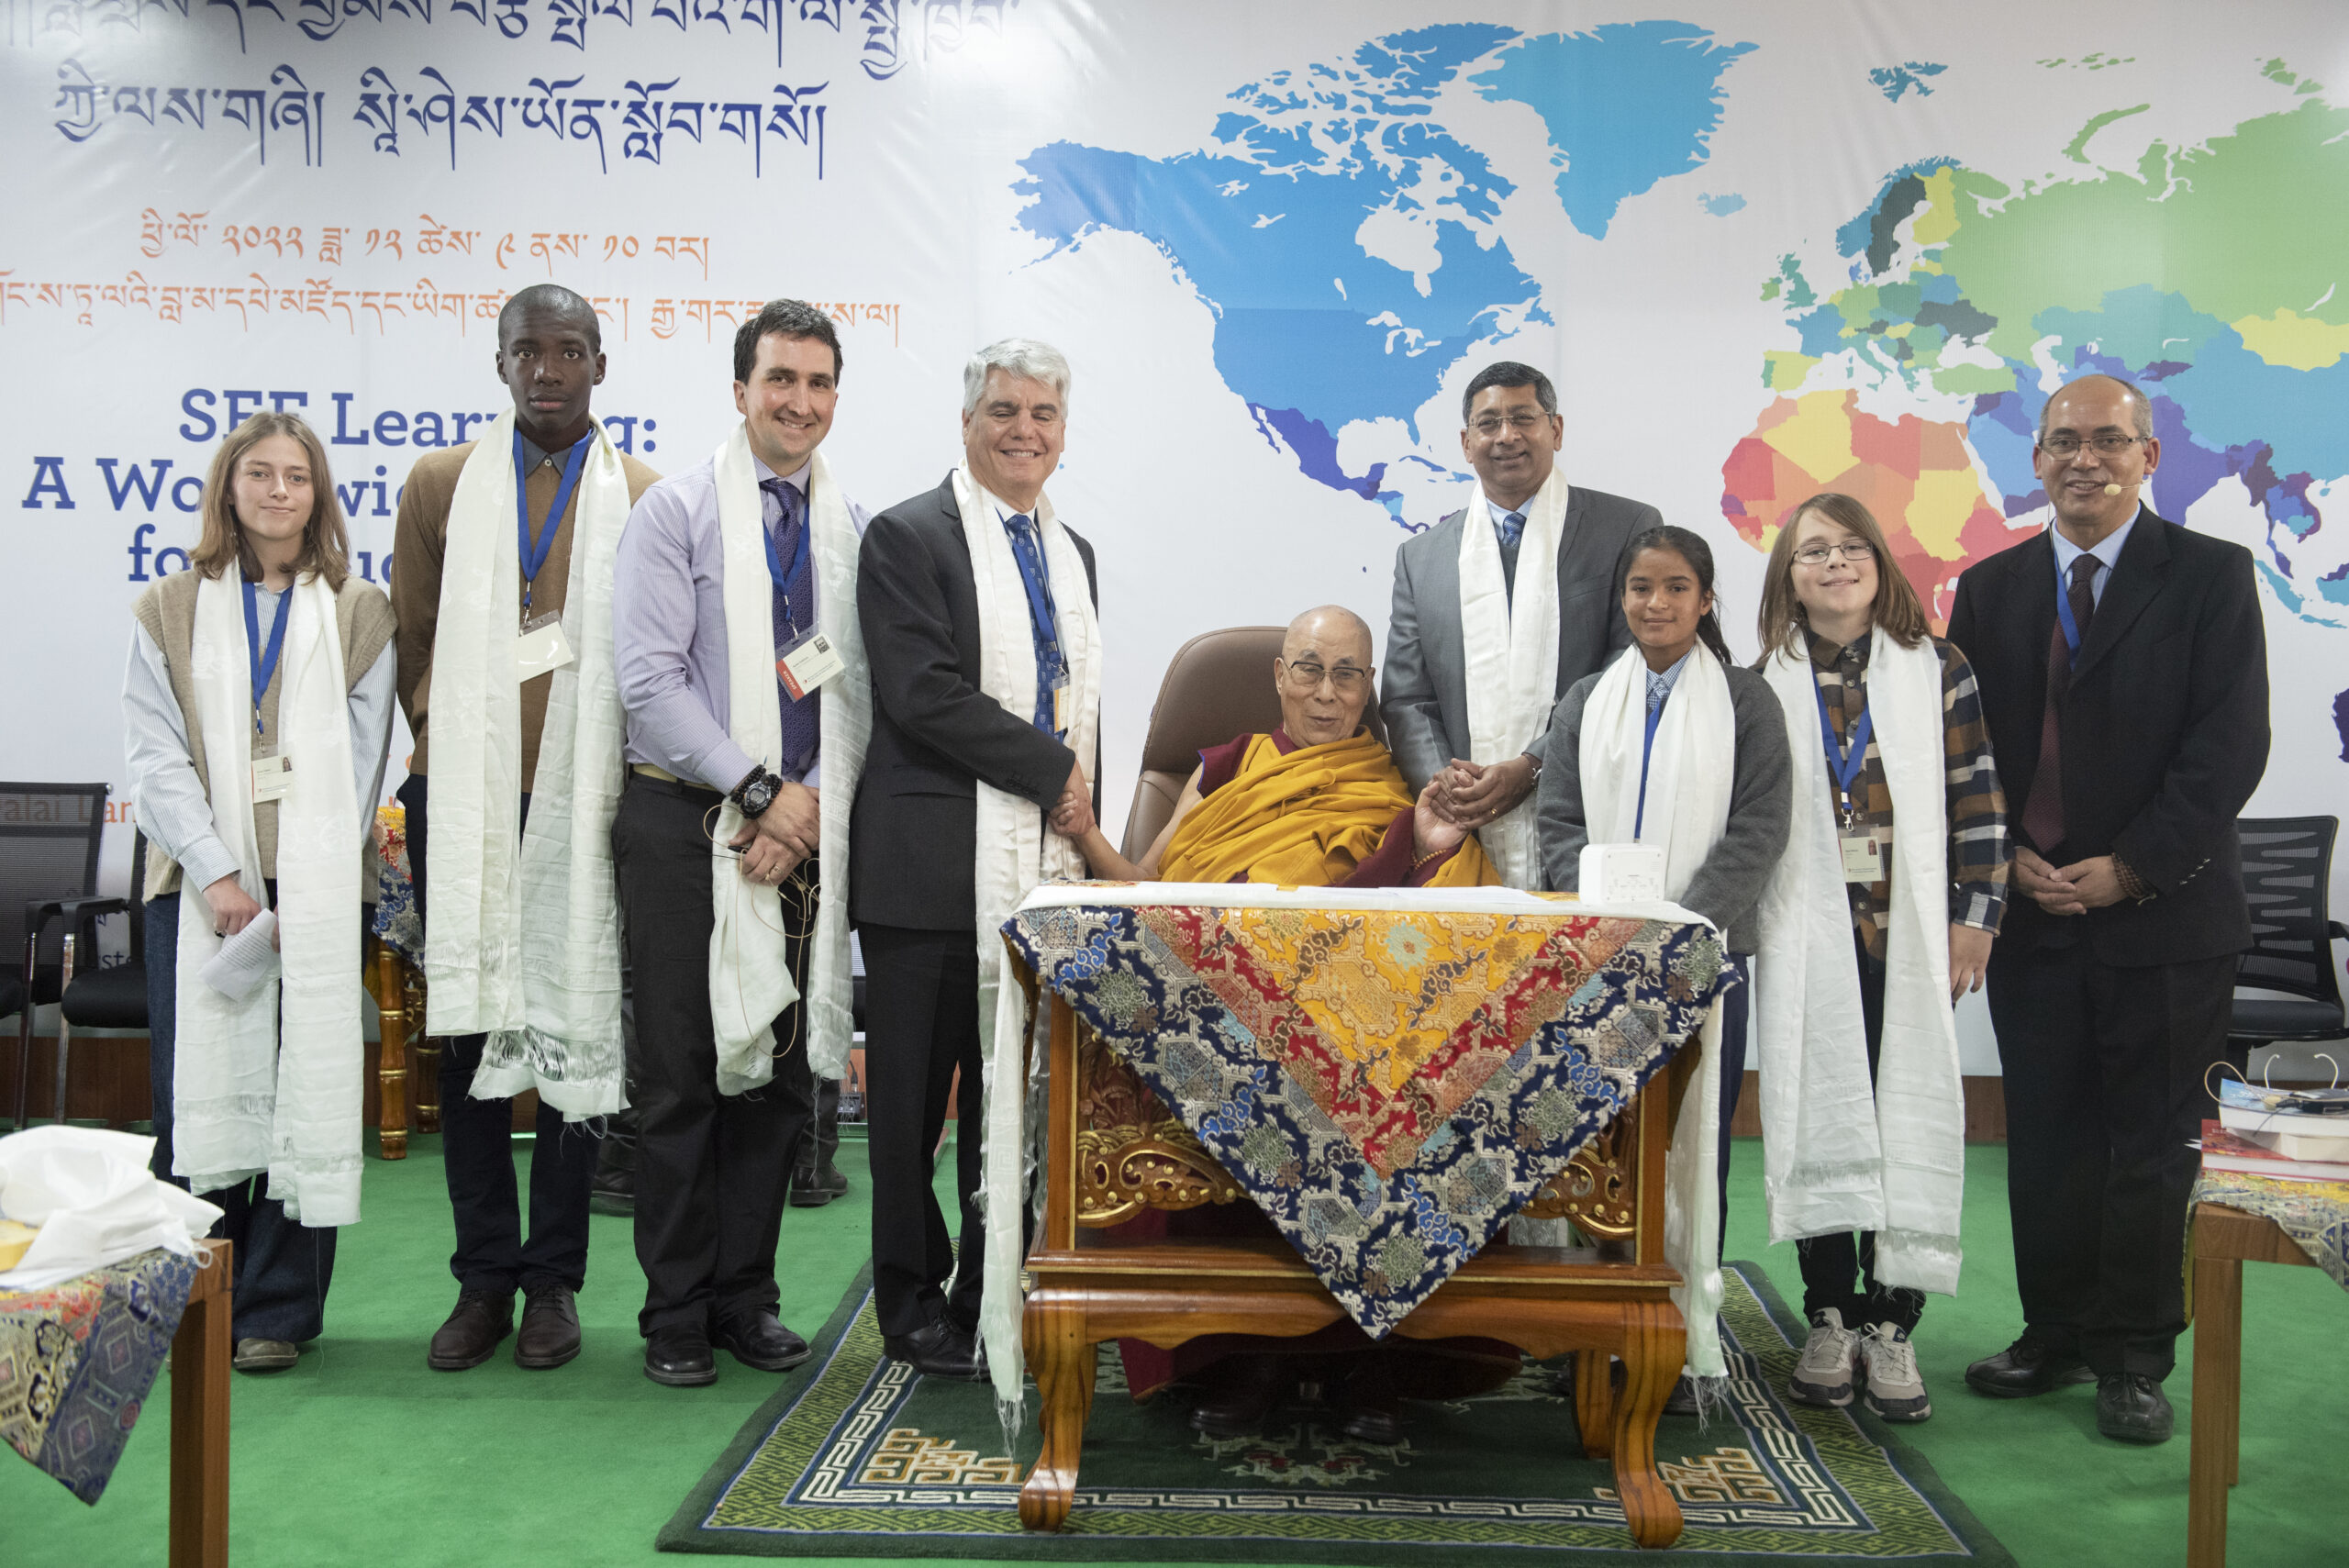 His Holiness the Dalai Lama with President Gregory L. Fenves and Vice-President Provost Ravi V. Bellamkonda, executive director of the Emory Compassion Center Lobsang Tenzin Negi and four questioners. Photo / Tenzin Jigme Taydeh / CTA